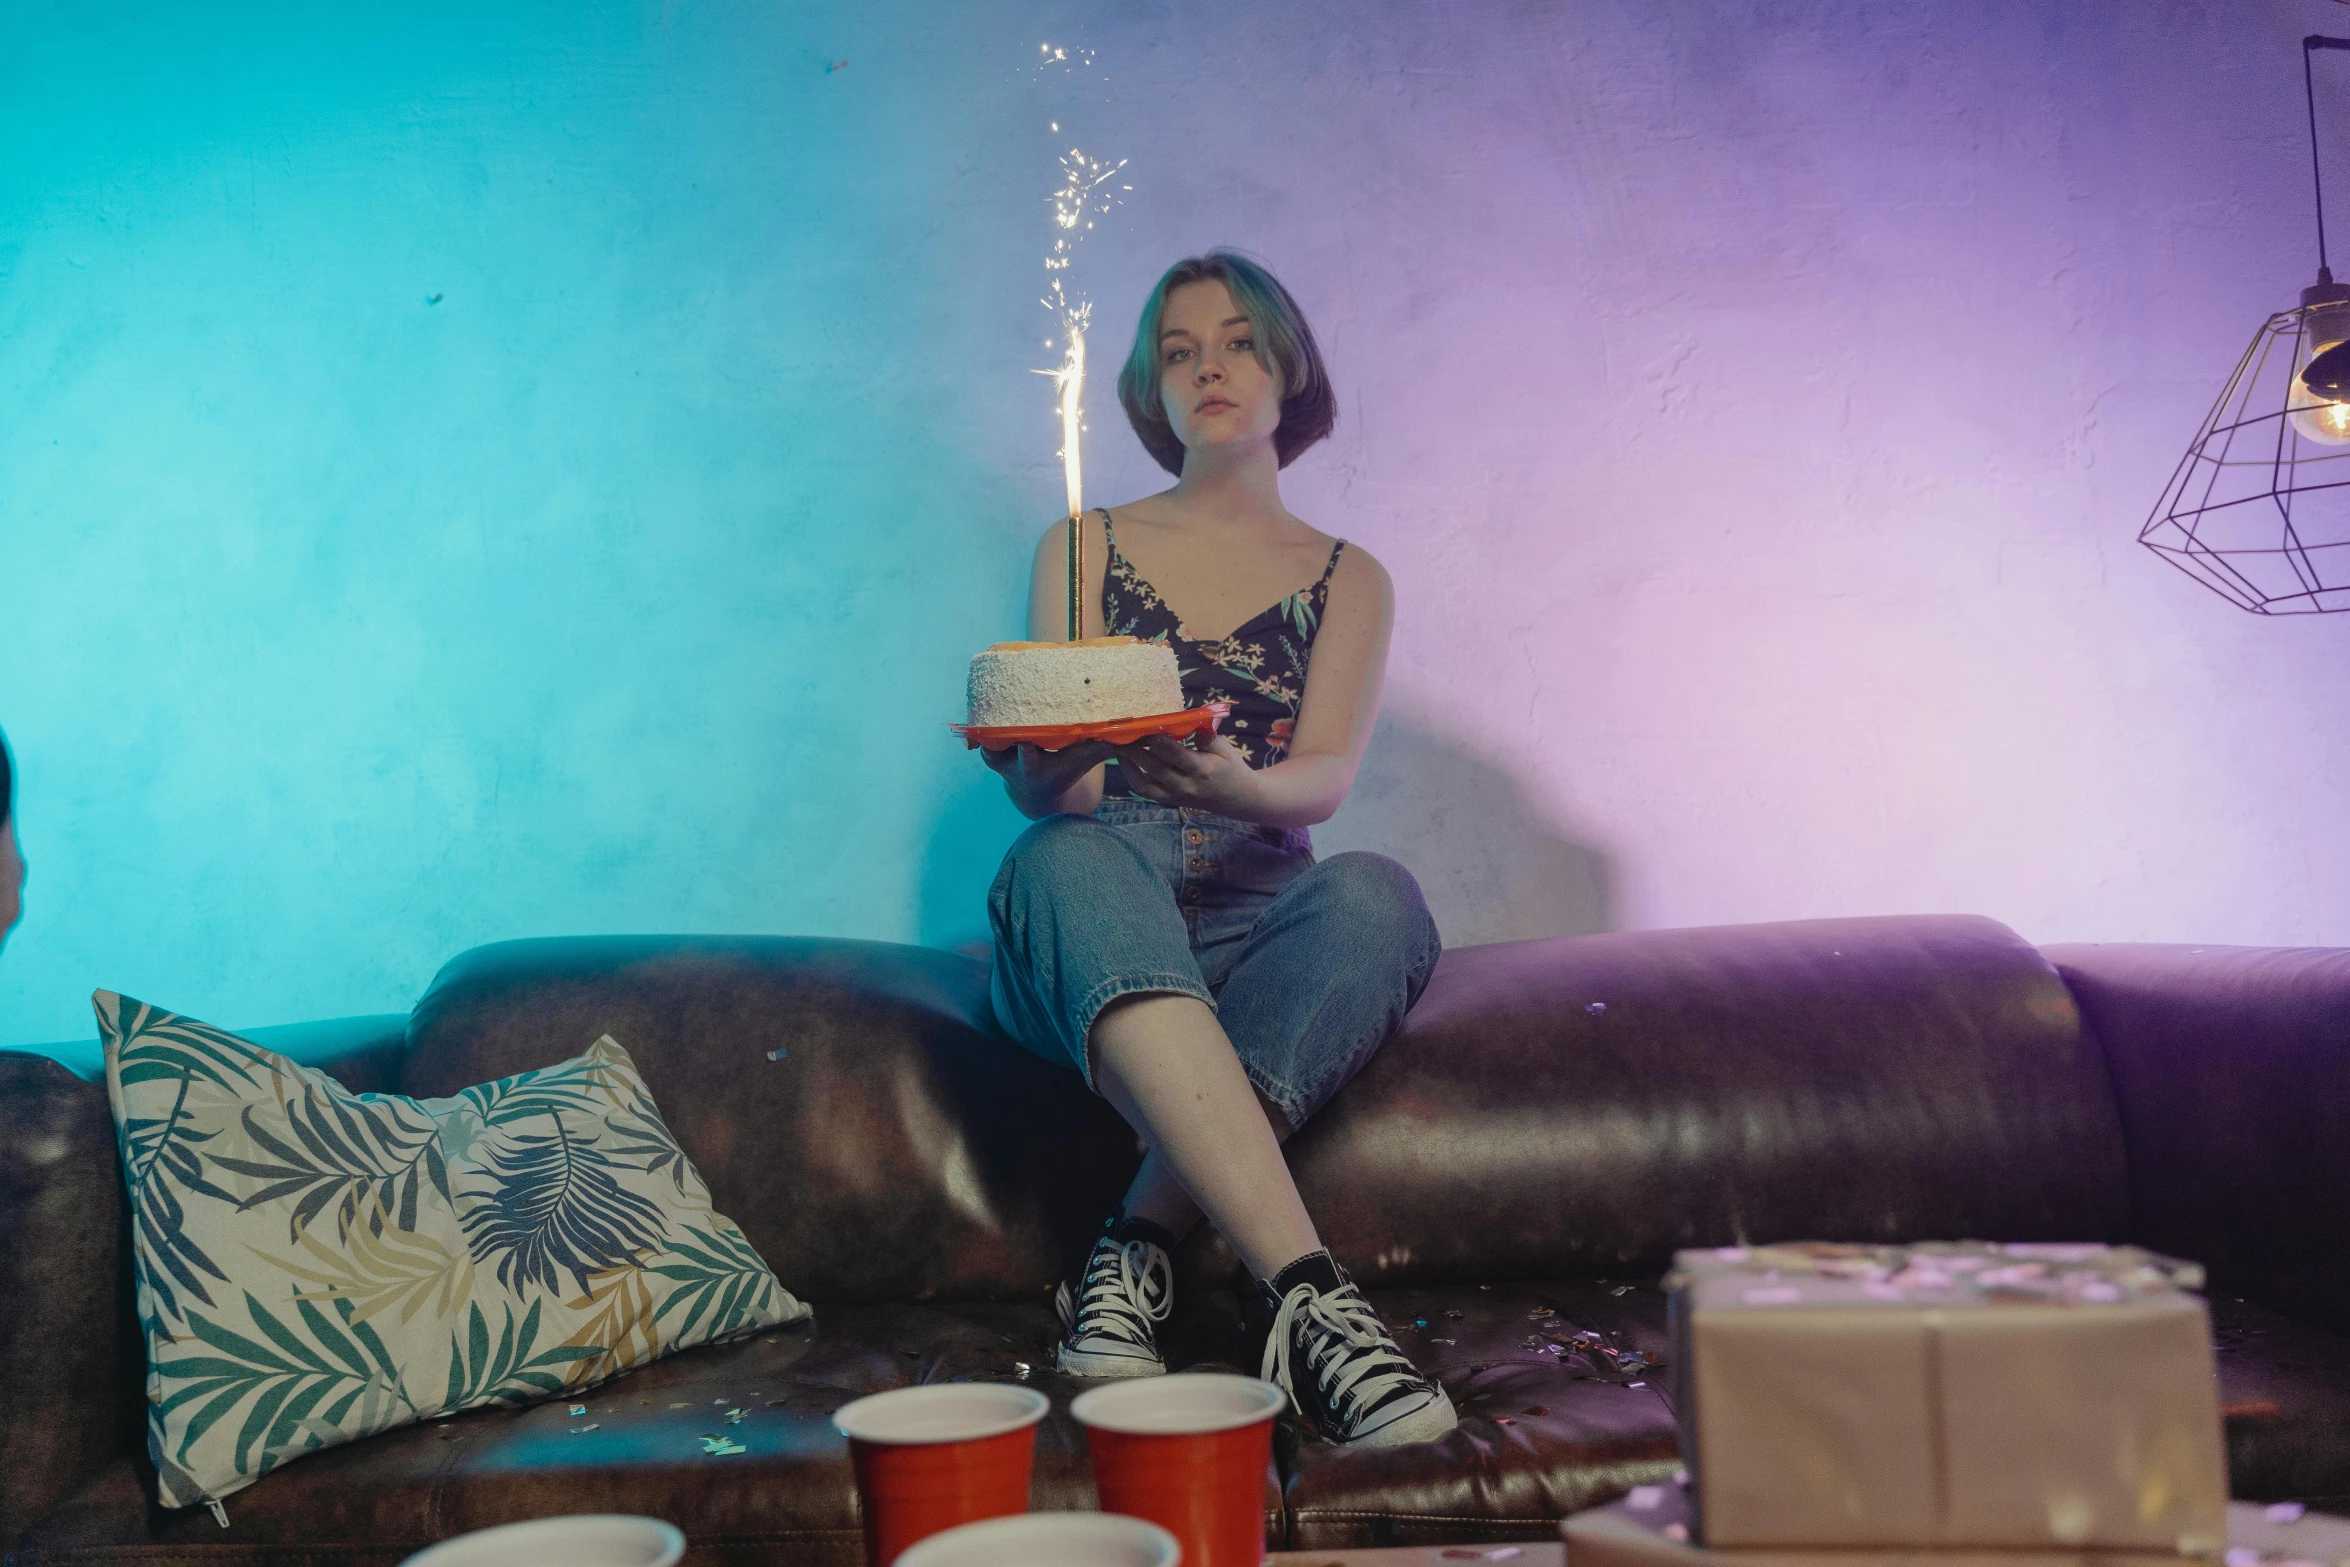 a woman sitting on a couch holding a birthday cake, inspired by Elsa Bleda, pexels contest winner, graffiti, maisie williams, pyrotechnics, bisexual lighting, at a birthday party